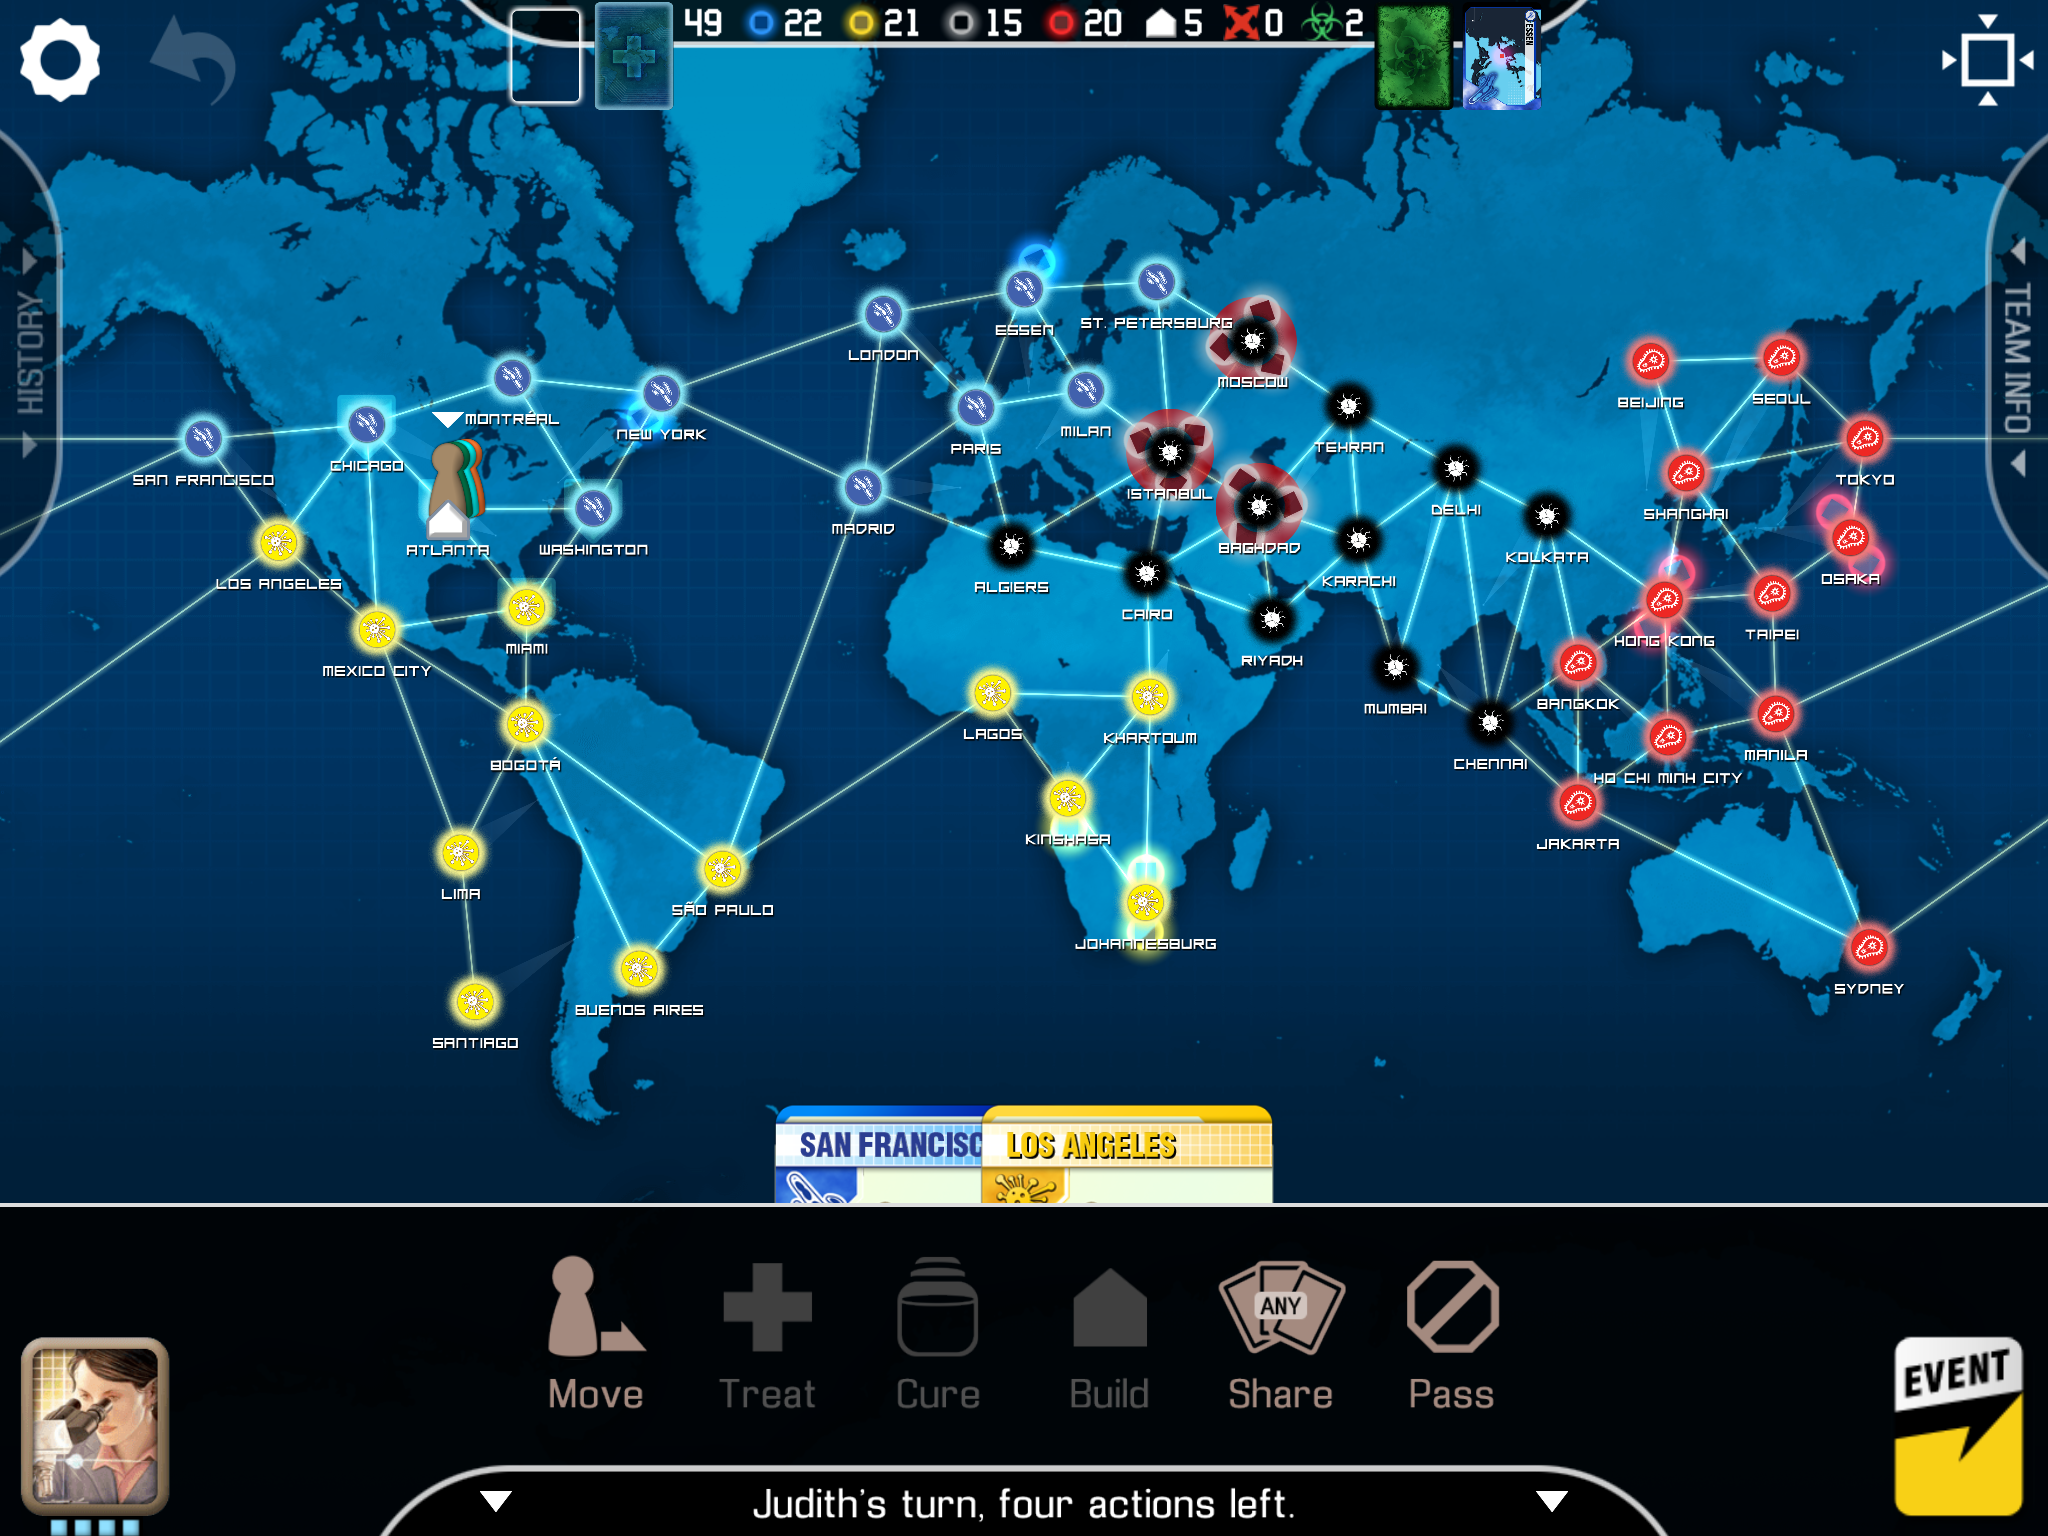 Screen from the digital version of the game Pandemic. The main play area is a map of the world, showing where disease outbreaks have occured. The player's hand is also shown at the bottom of the screen.